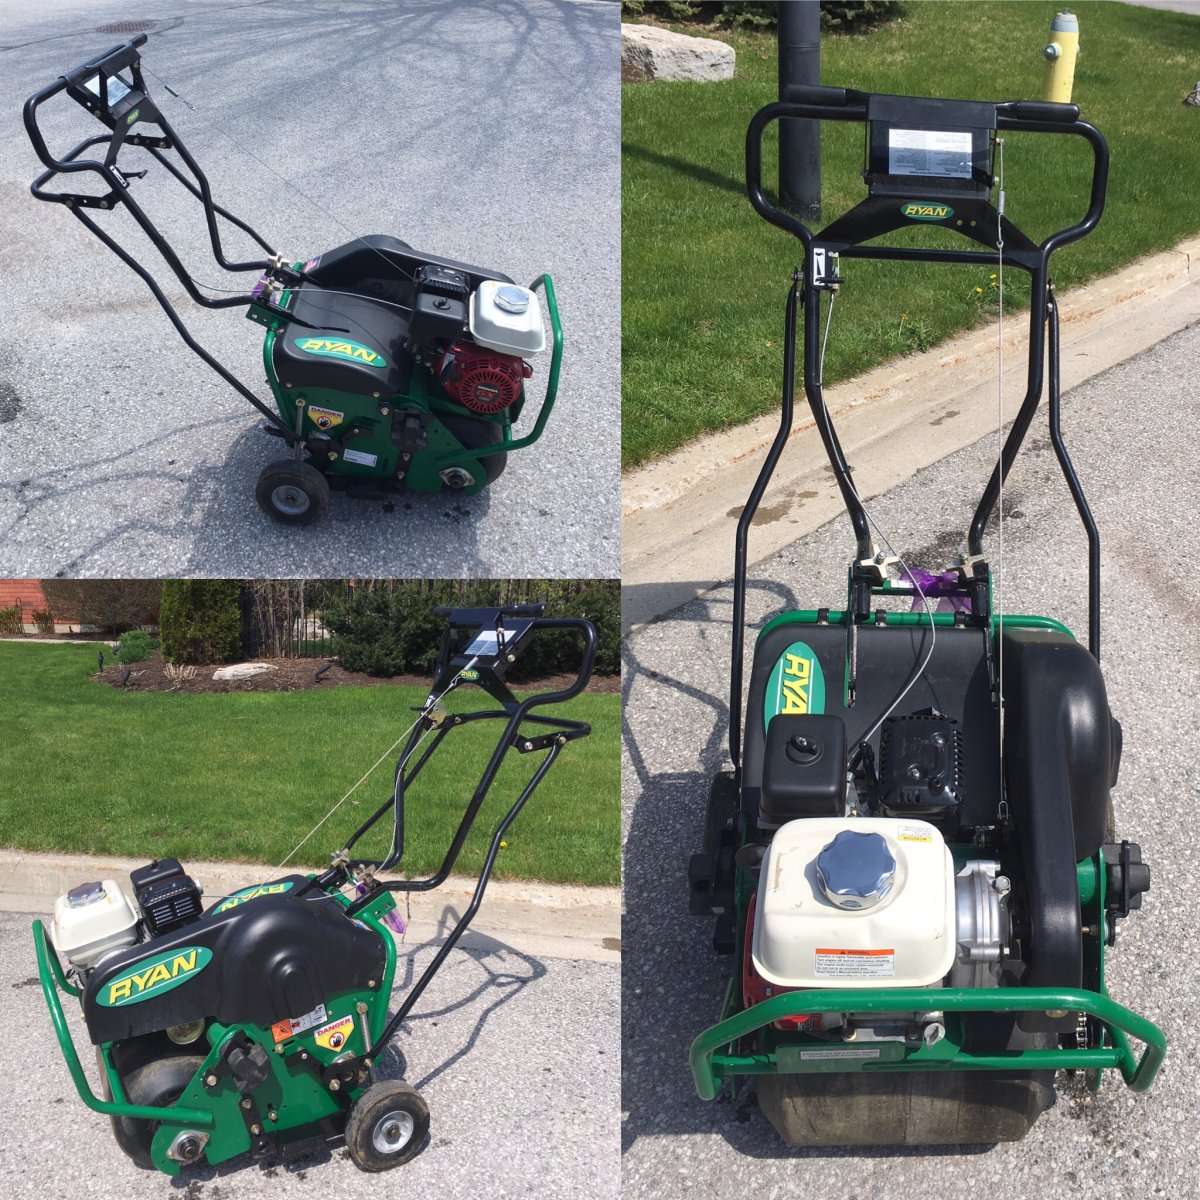 RCMP is asking for the public’s assistance in locating a lawn aerator that was stolen on Saturday night.